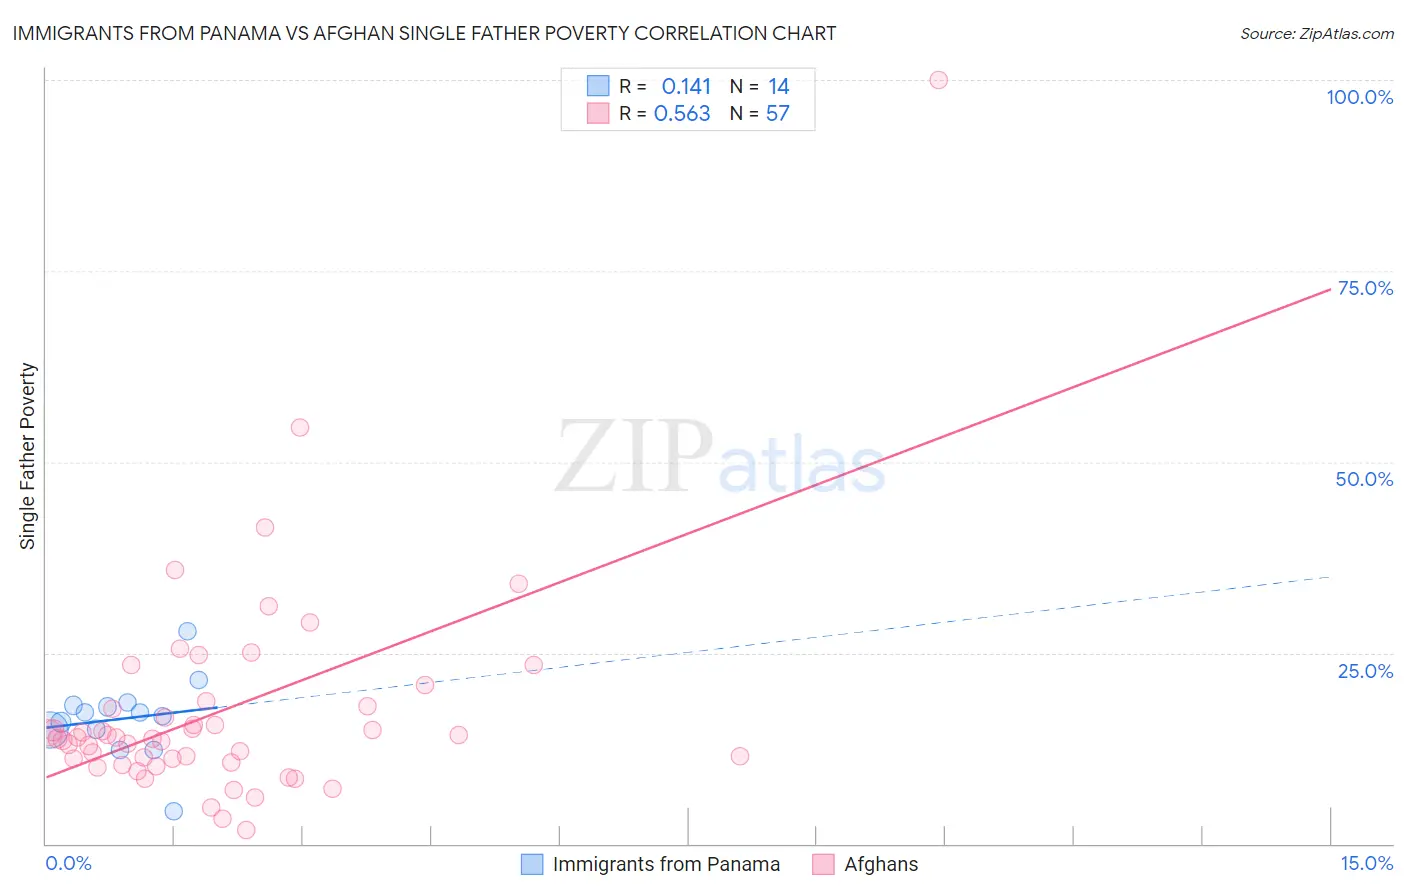 Immigrants from Panama vs Afghan Single Father Poverty